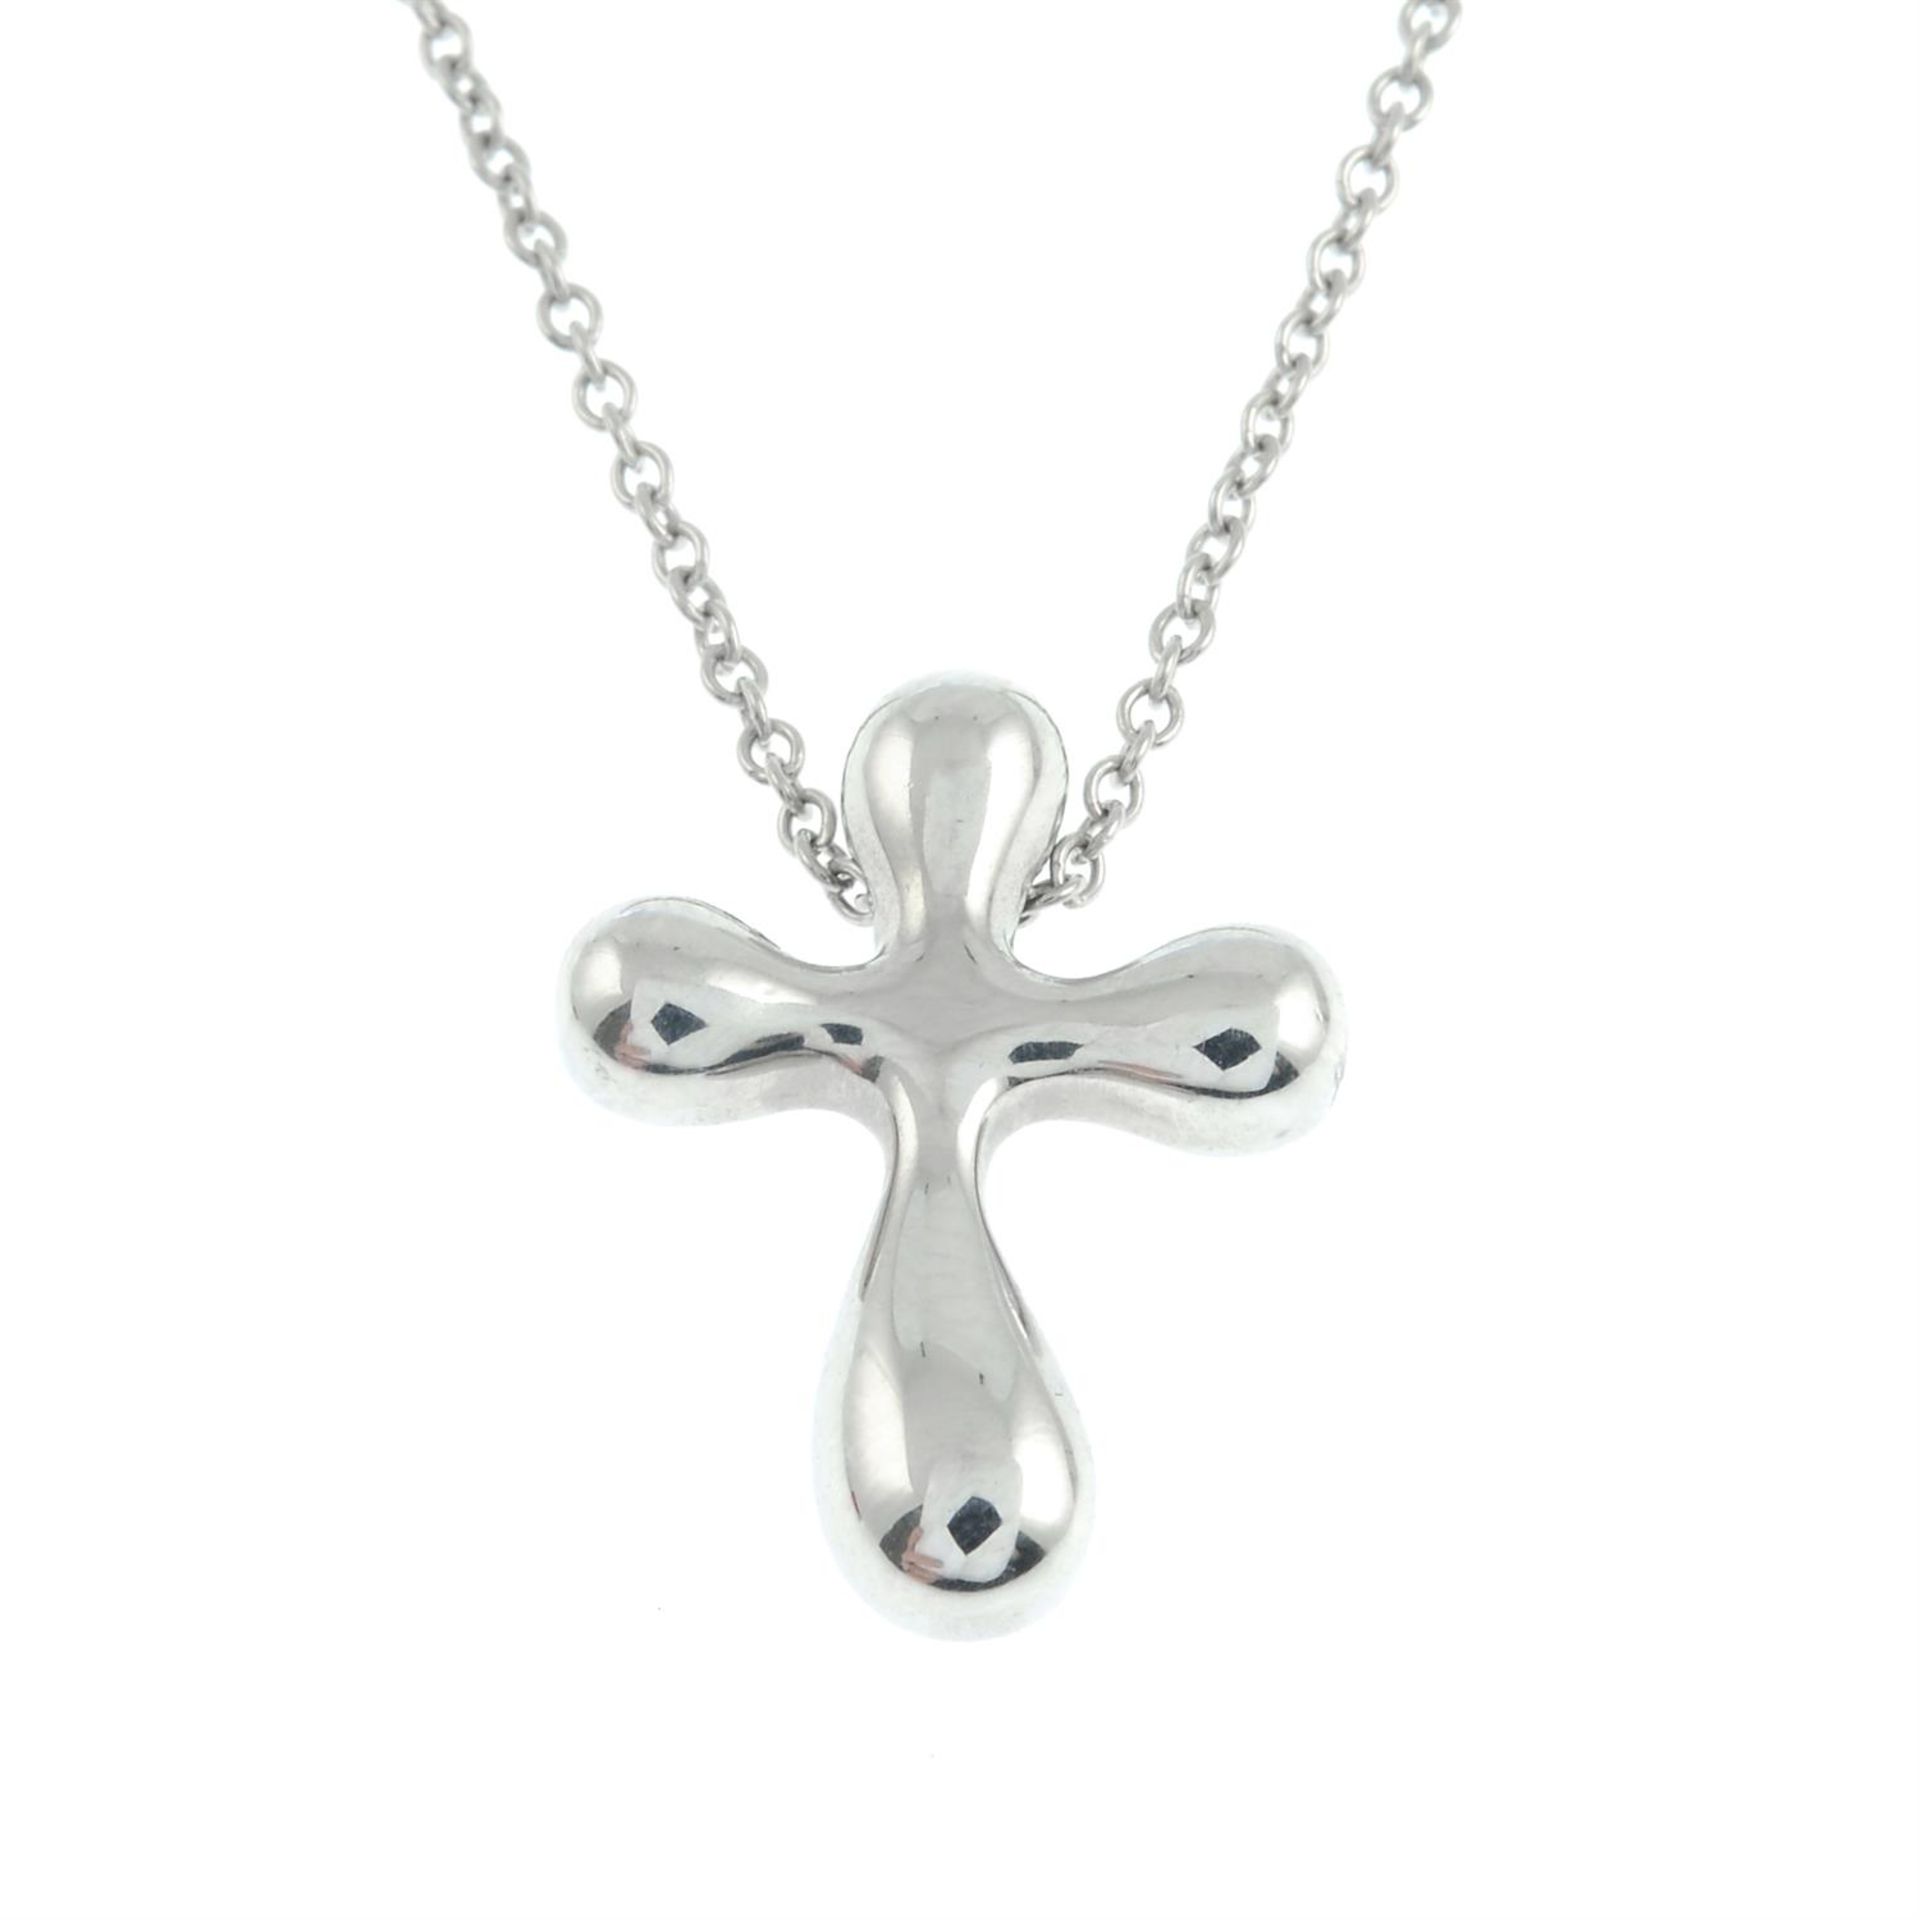 A cross pendant, with chain, by Elsa Peretti for Tiffany & Co.